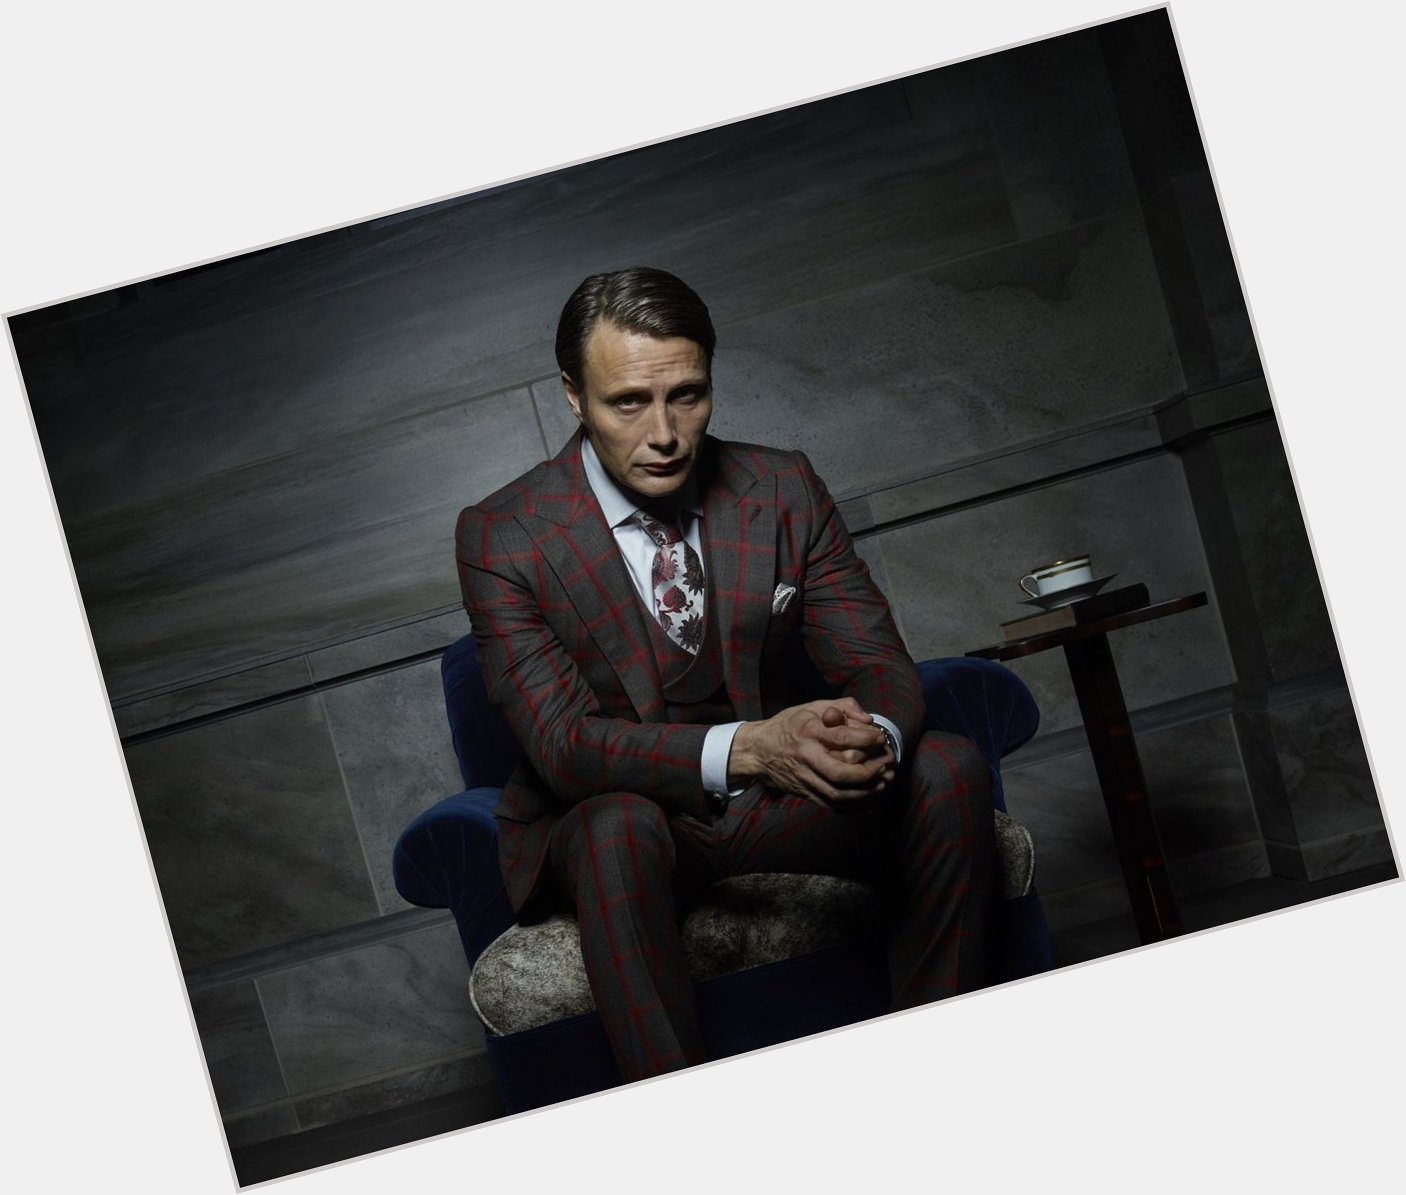 Happy Birthday Mads Mikkelsen! Who else could make cannibalism look that good?  